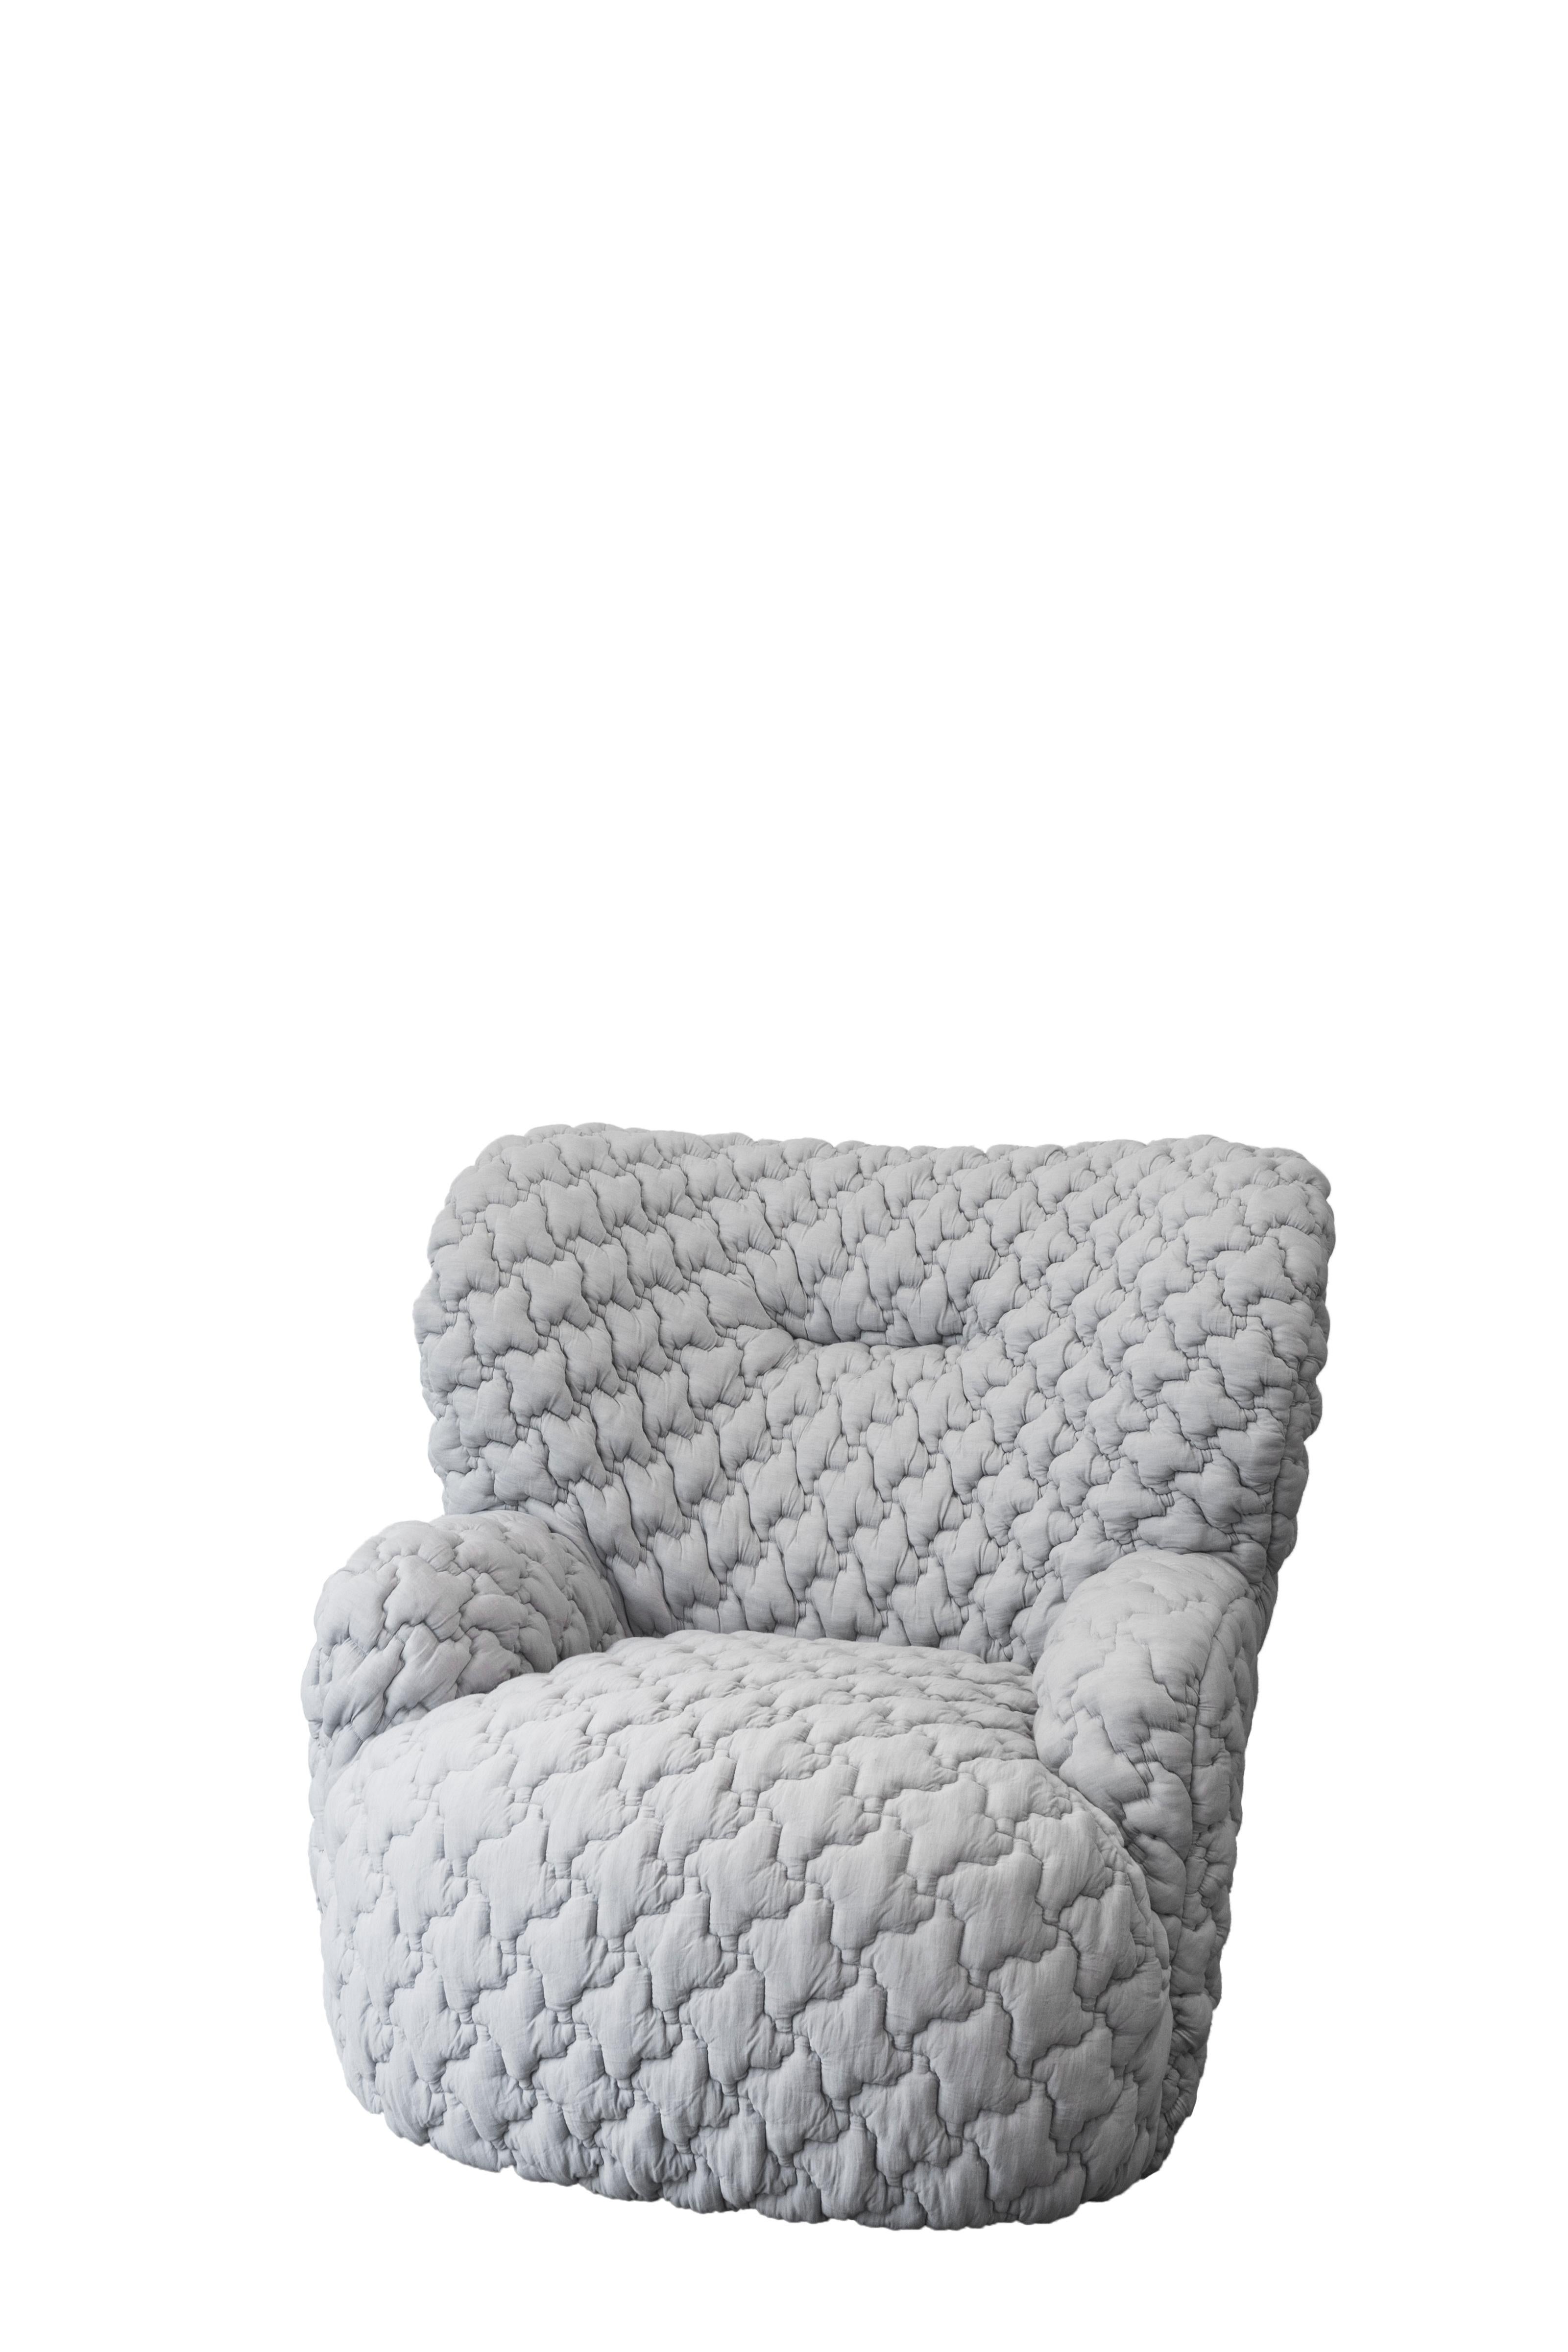 Product with an important shape, it has an enveloping structure whose particularity is found in the proportions between the seat and the backrest: the latter surrounds the seat padded with high-density polyurethane foam in different densities like a